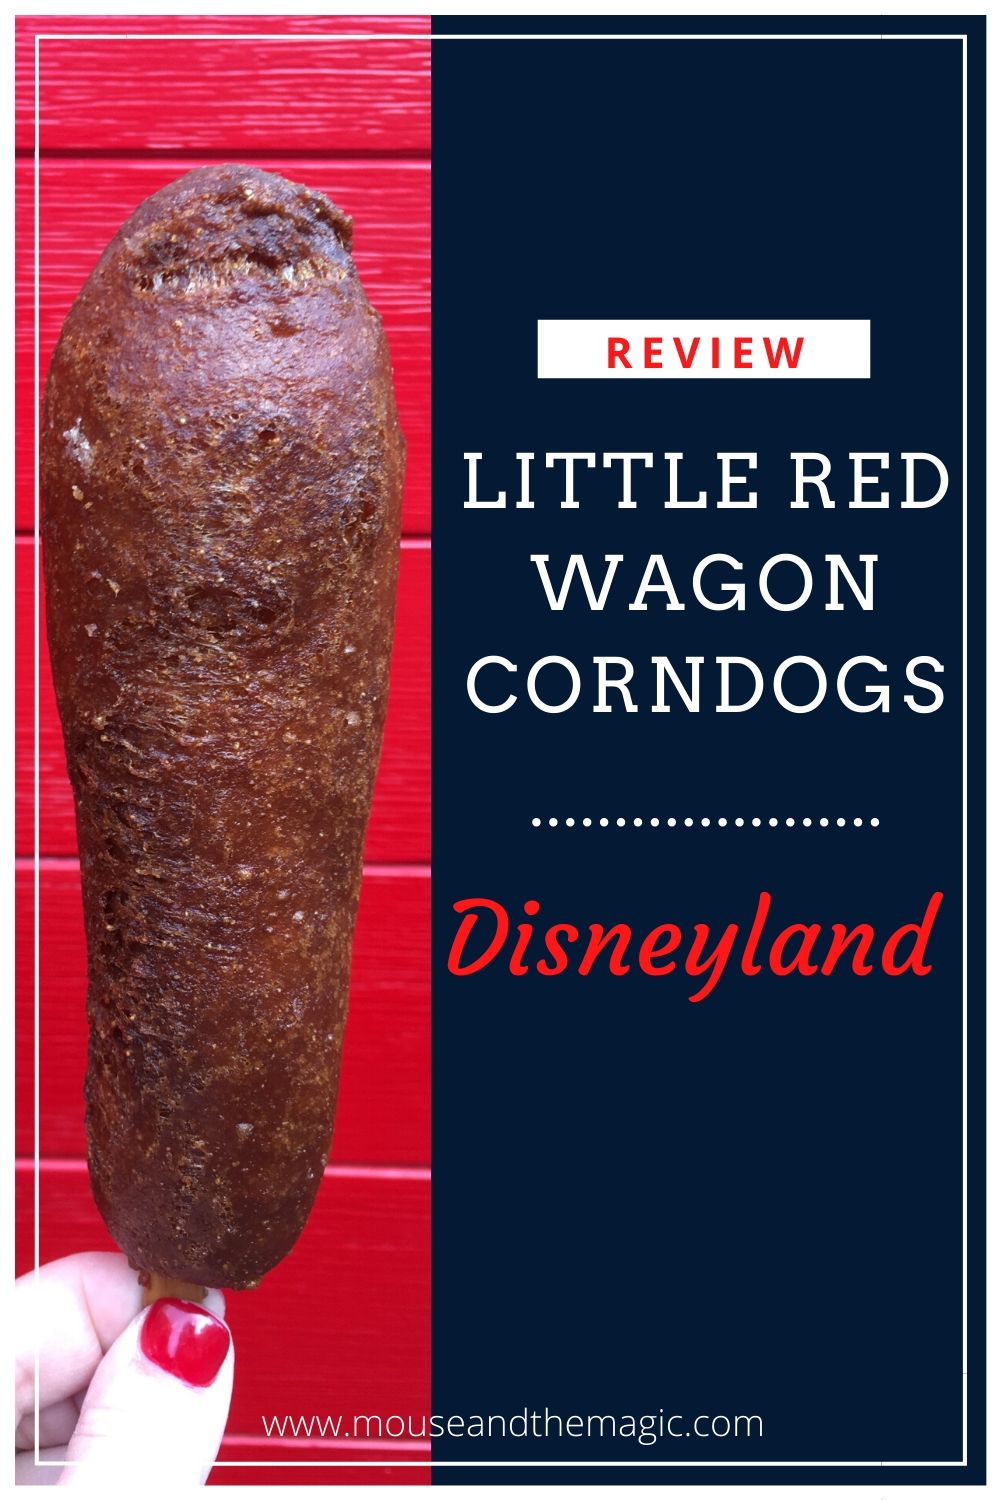 Review - Little Red Wagon Corn Dogs - Disneyland